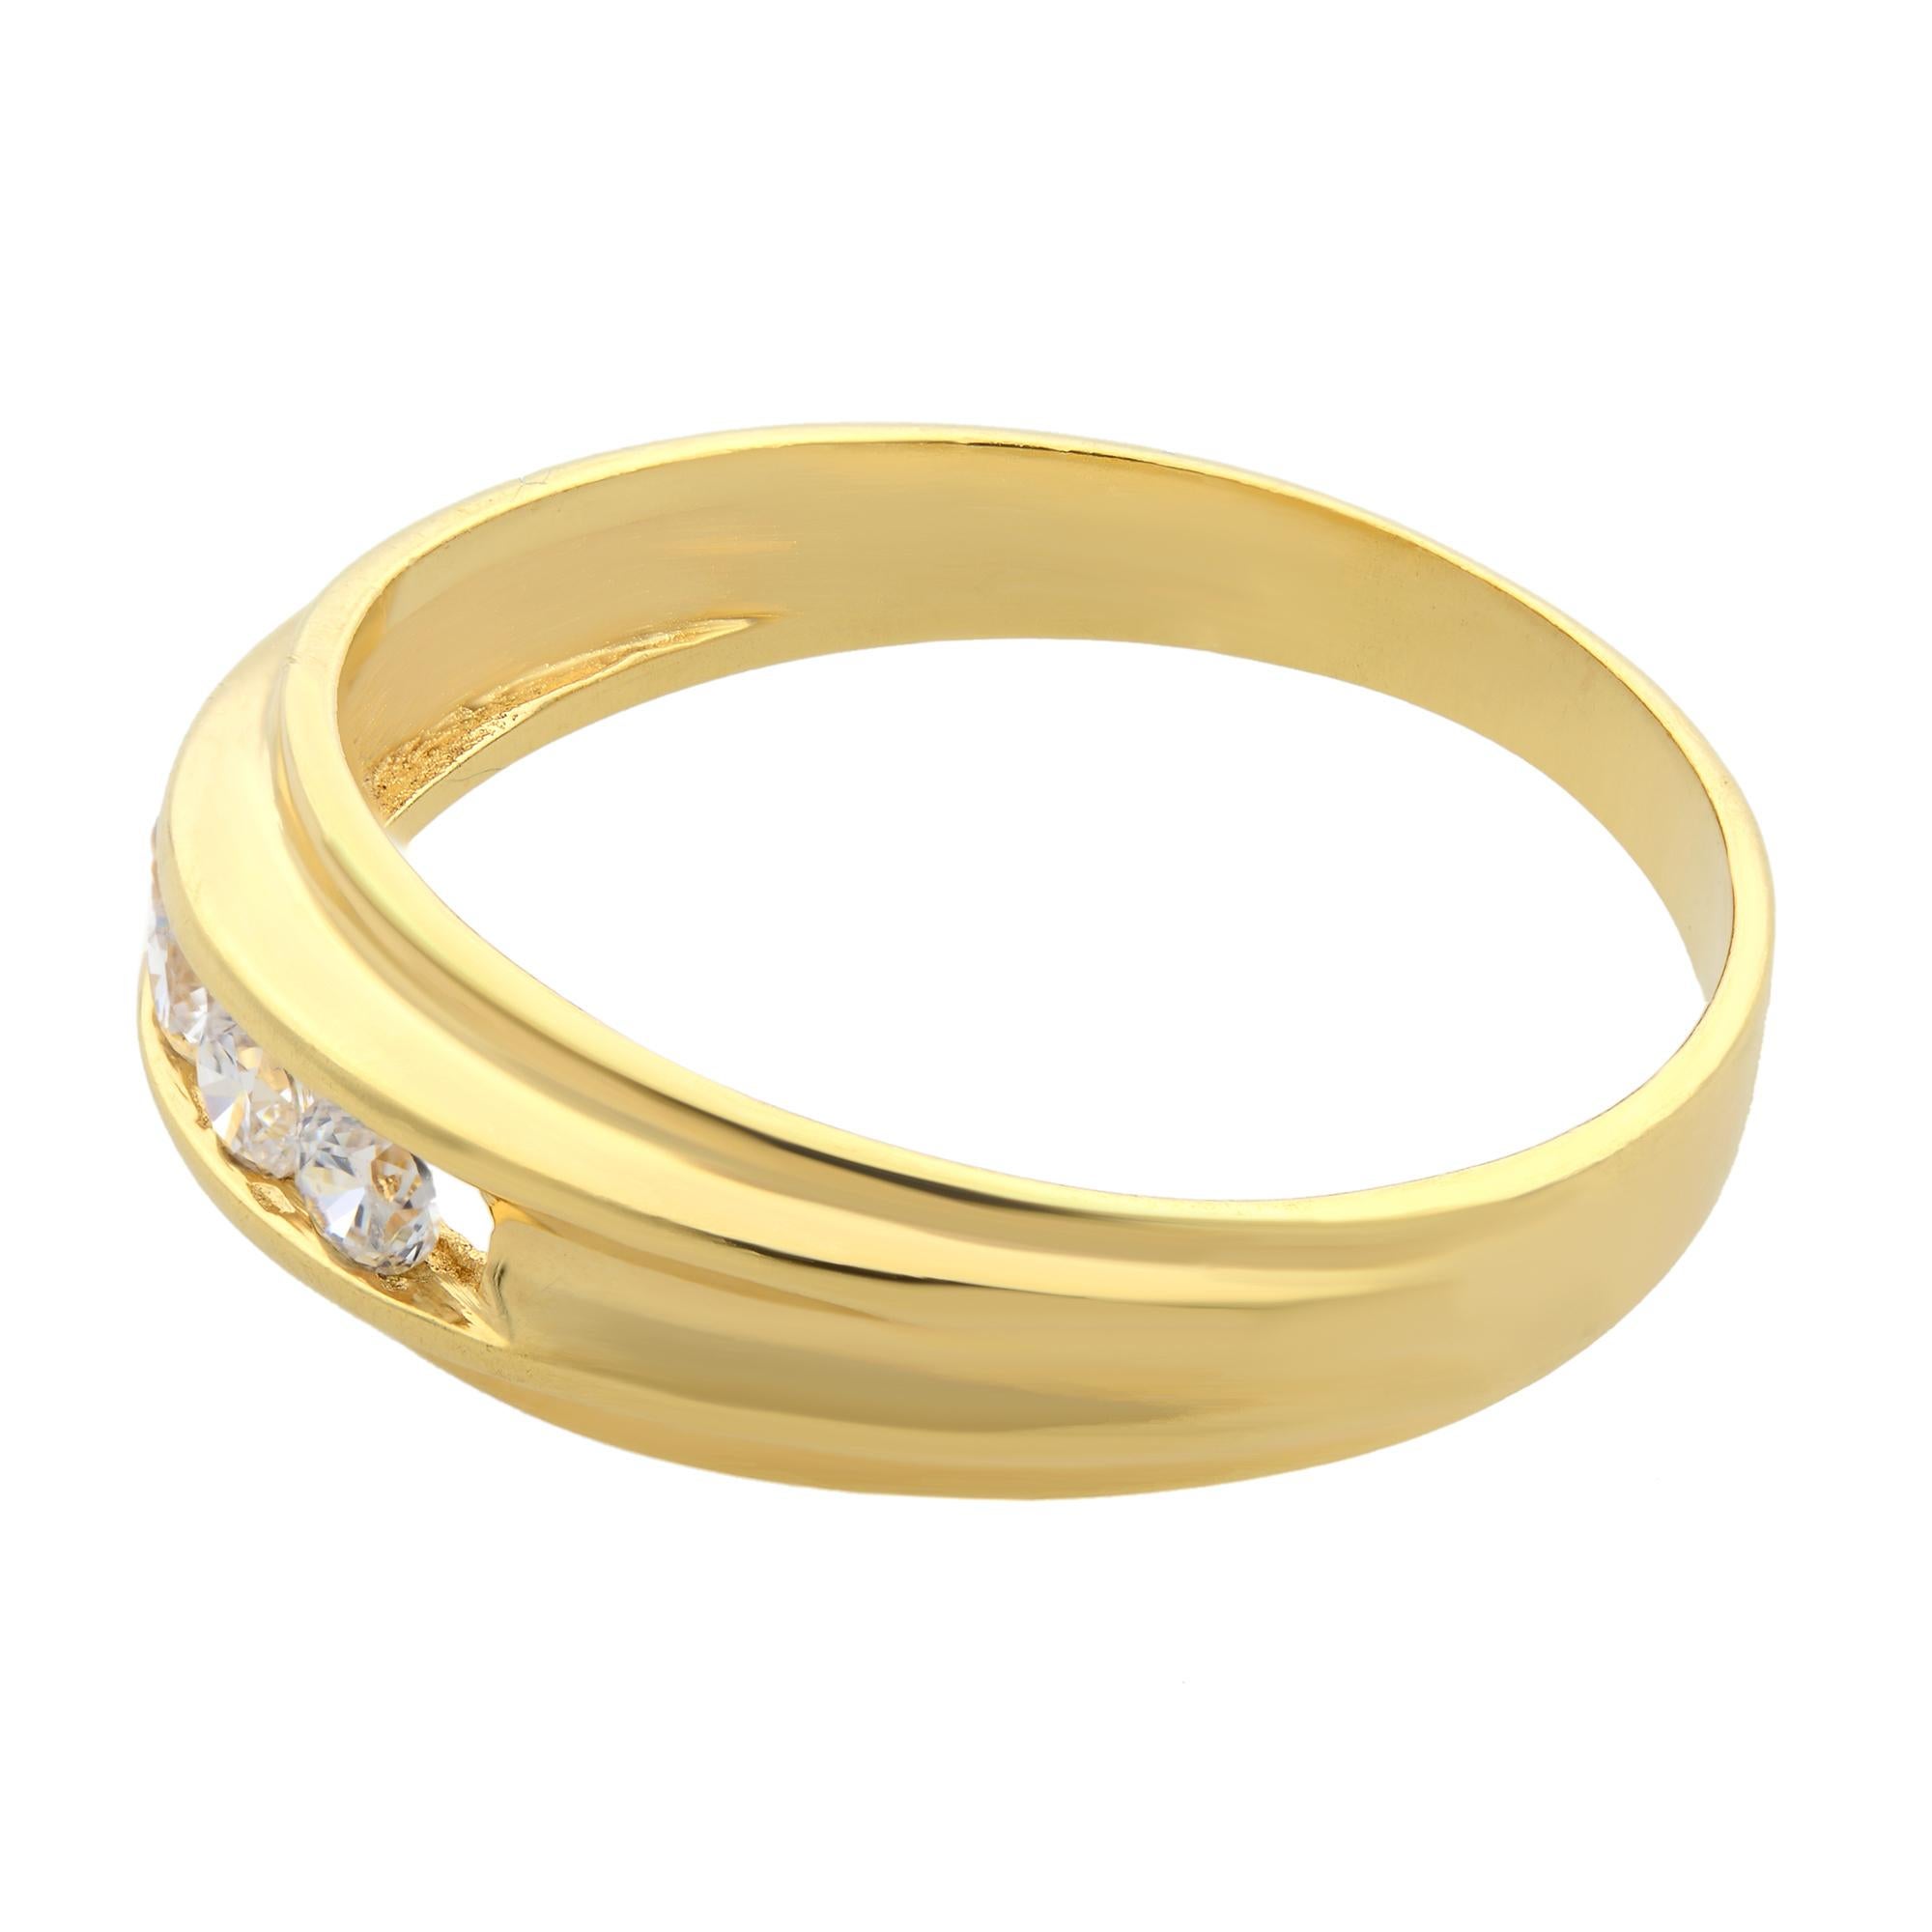 Rachel Koen 0.25Cttw Diamond Band Ring 18K Yellow Gold In Excellent Condition For Sale In New York, NY